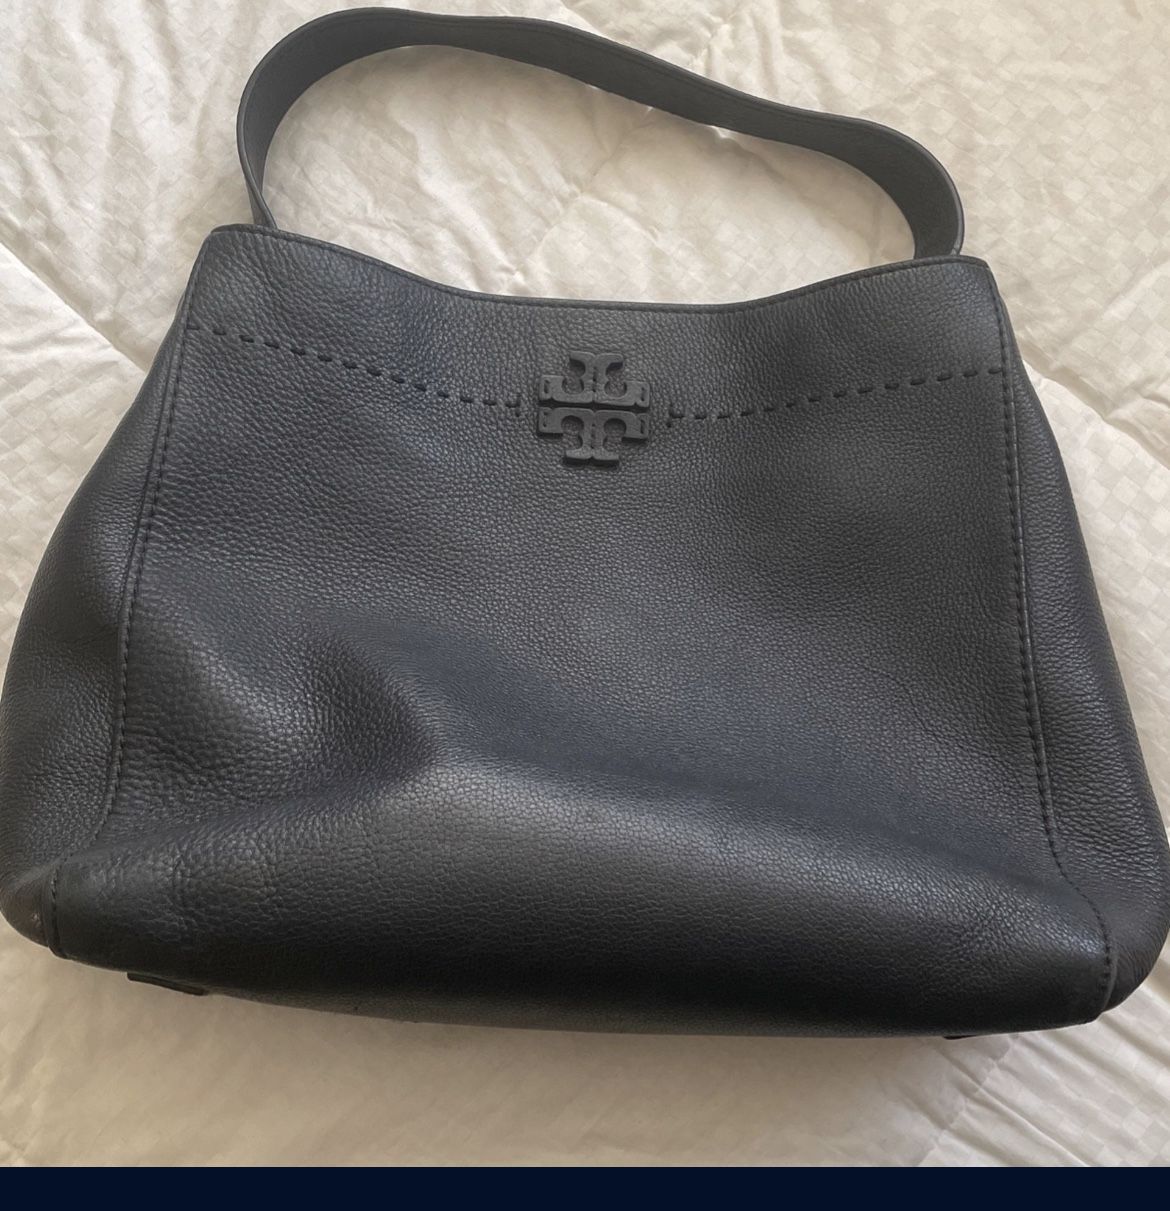 Tory Burch Ever Ready Open Tote for Sale in Anaheim, CA - OfferUp